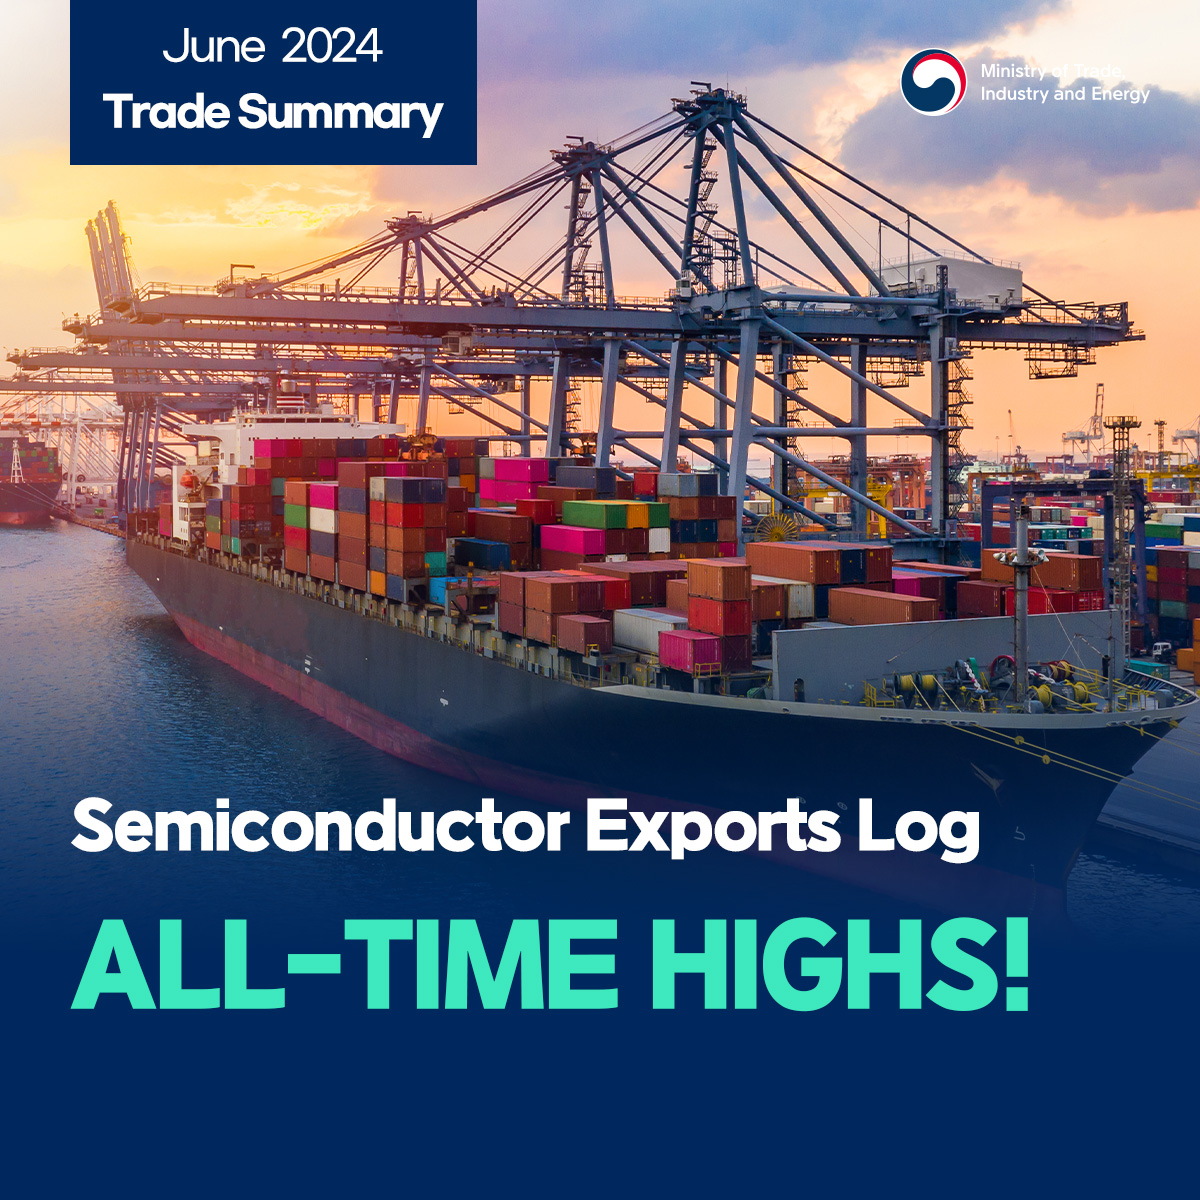 Semiconductor exports log all-time highs in June!